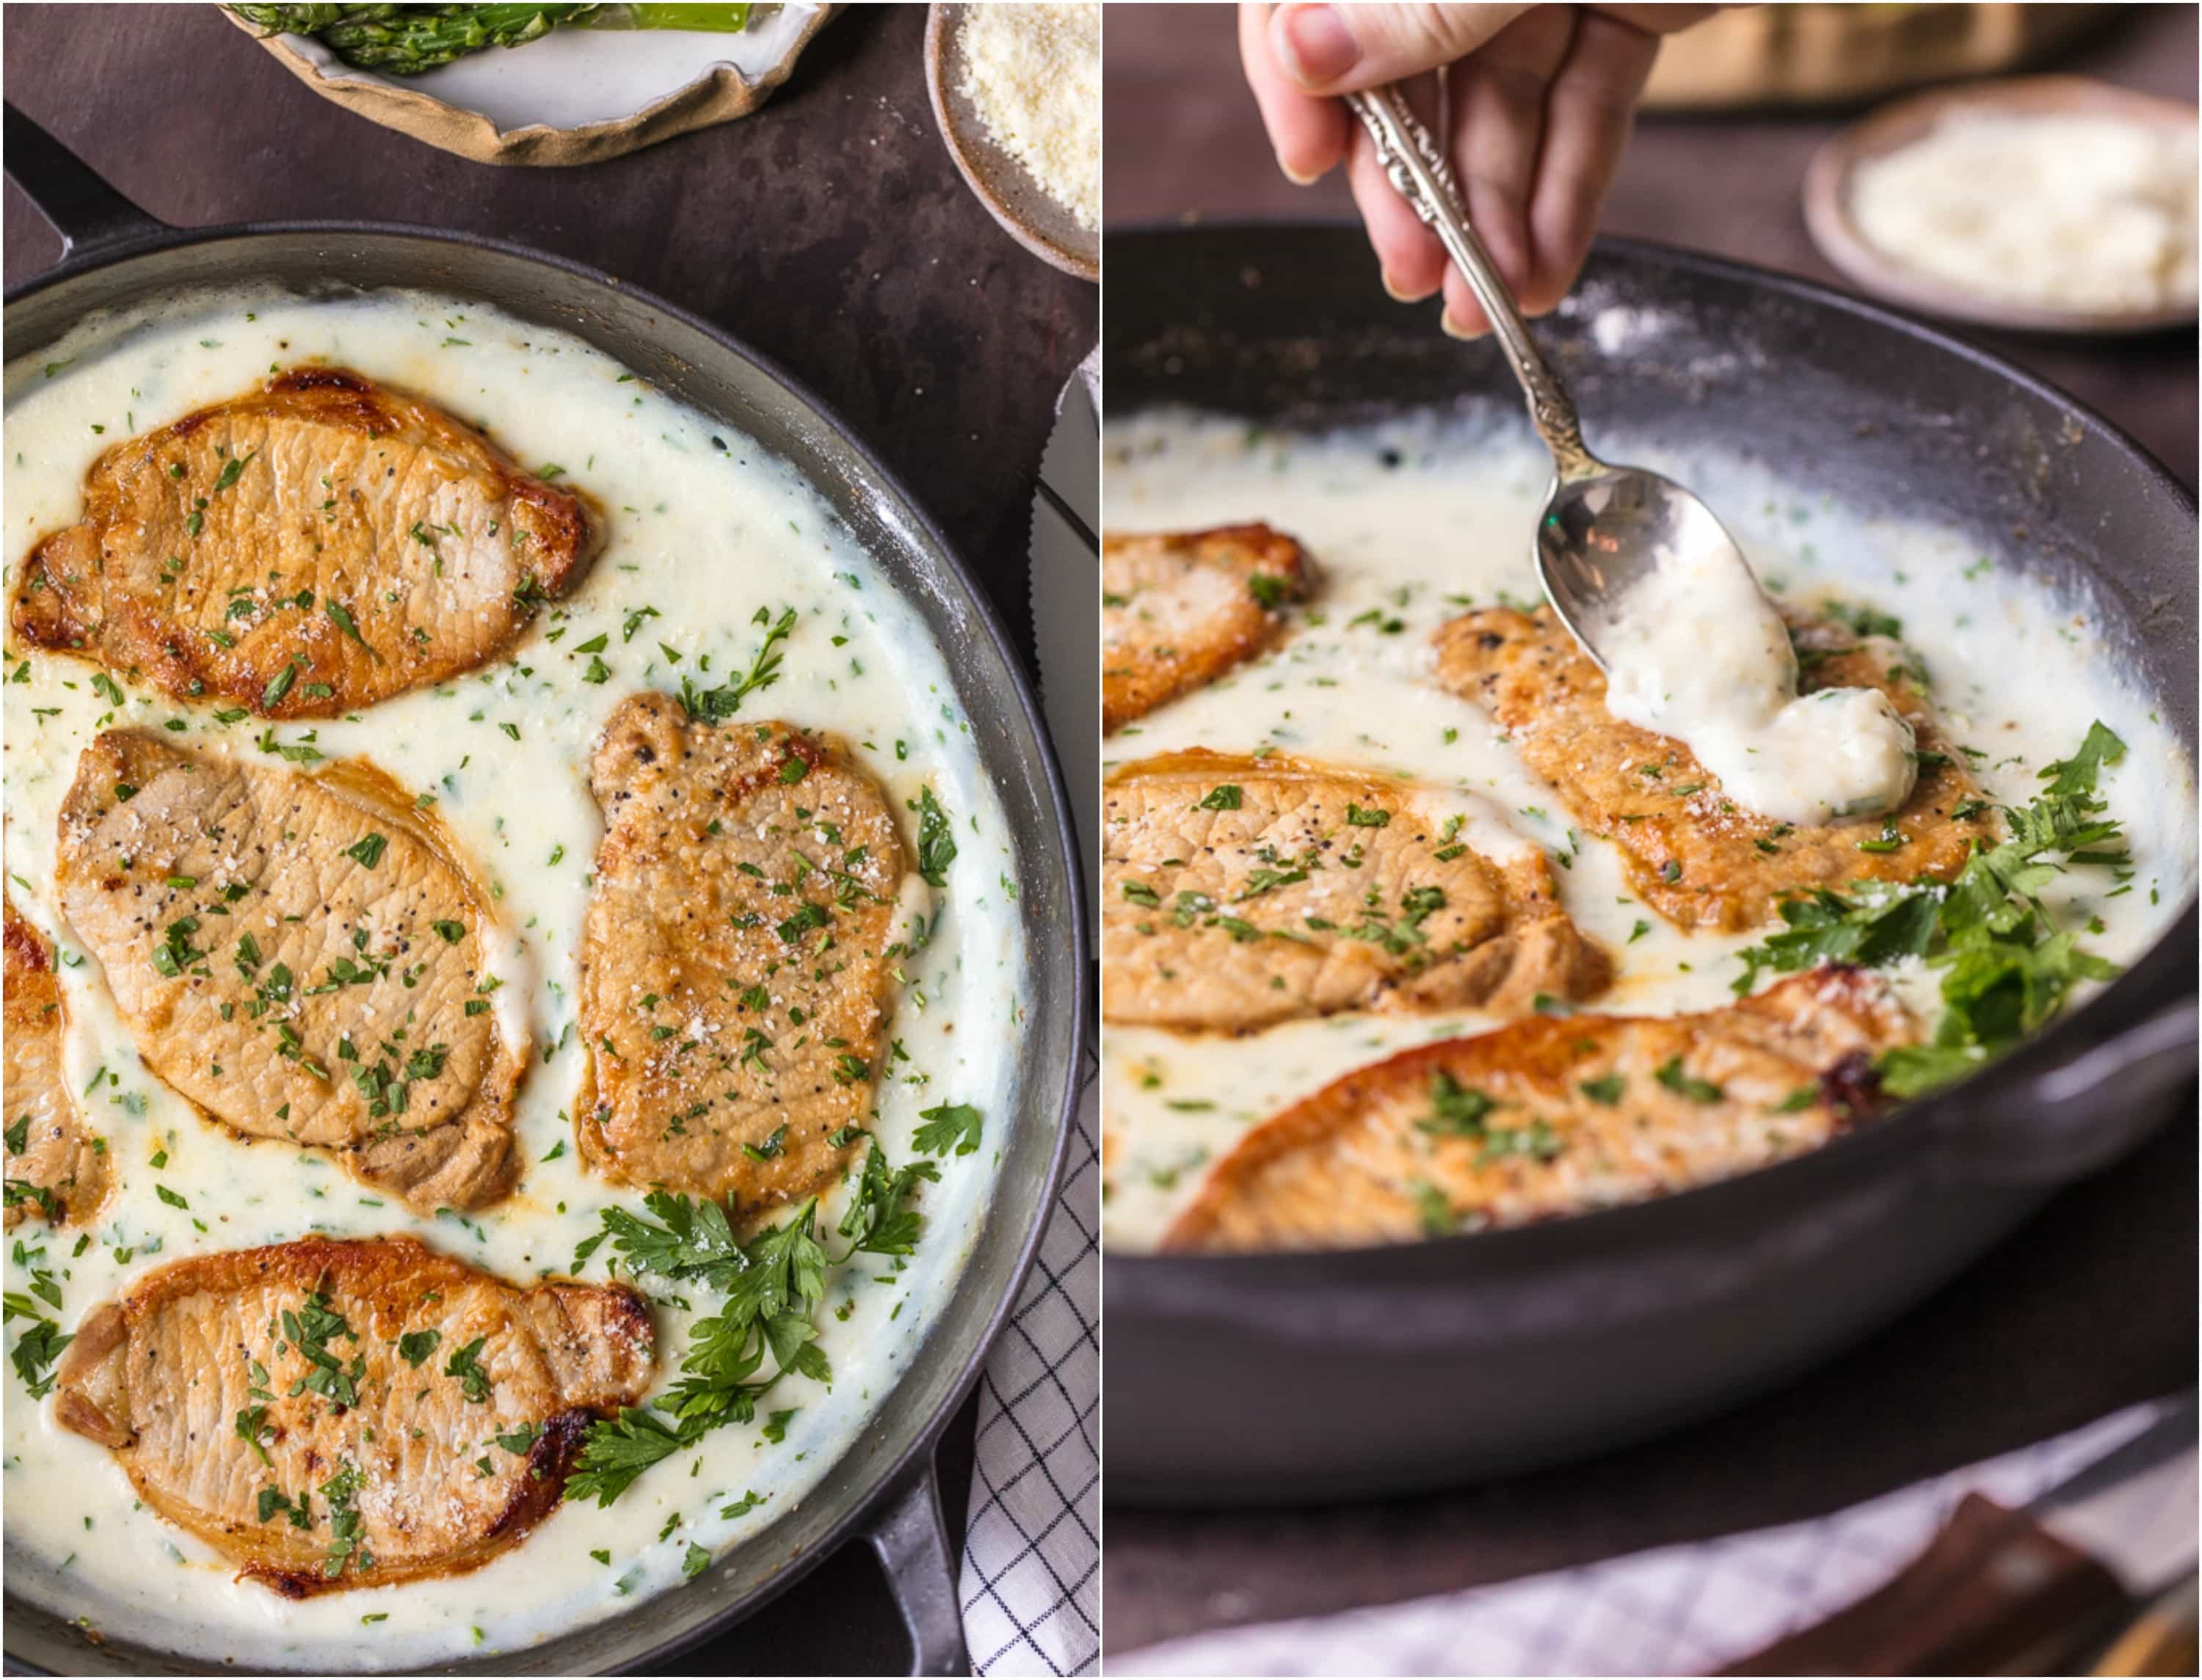 These CREAMY GARLIC PARMESAN PORK CHOPS are easy, made in ONE PAN, and so delicious. The ultimate comfort food!